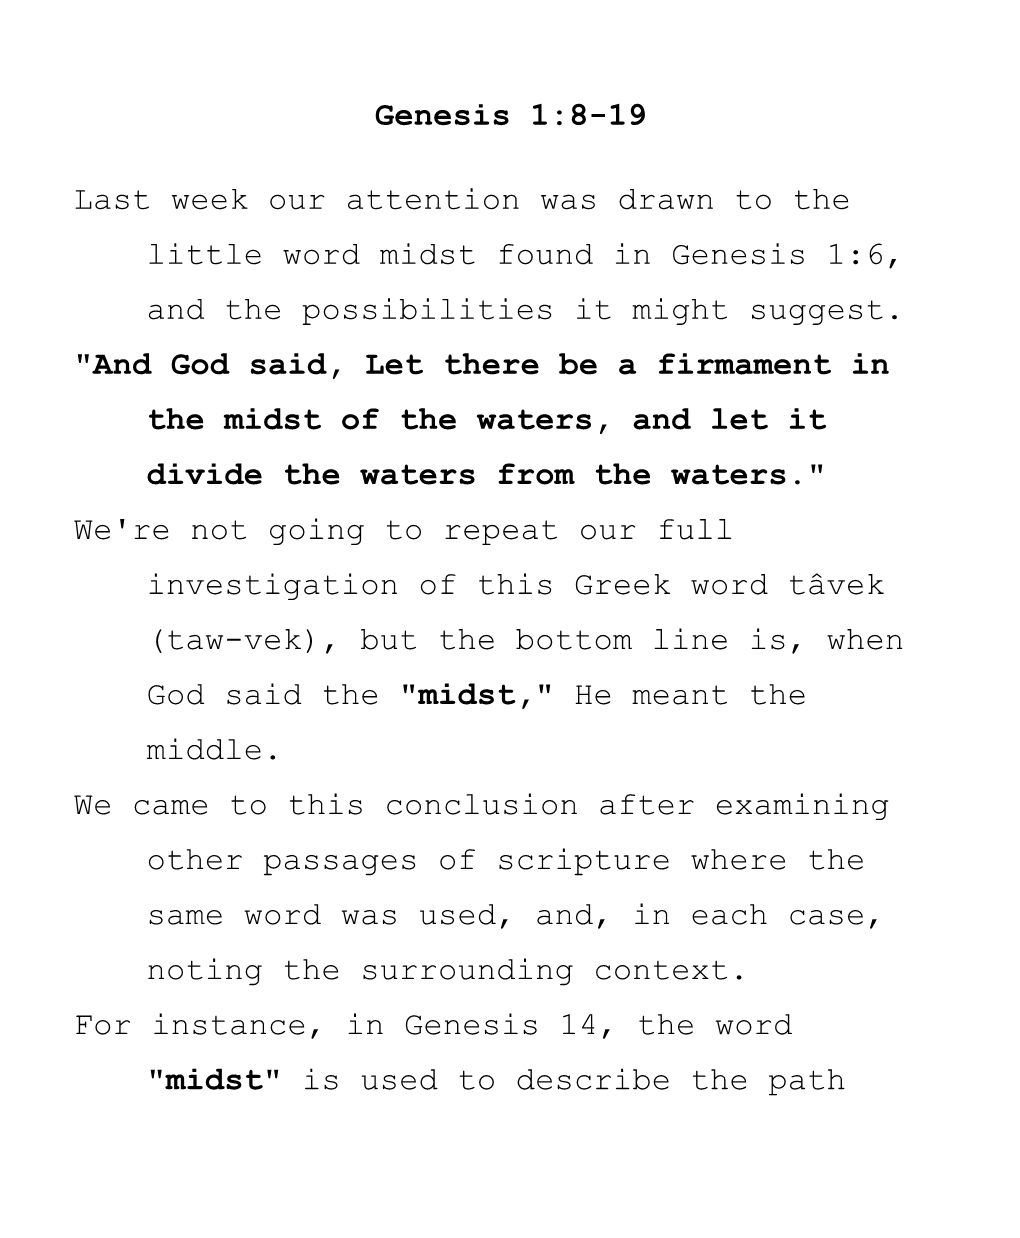 Last Week Our Attention Was Drawn Tothe Little Word Midst Found in Genesis 1:6, and The